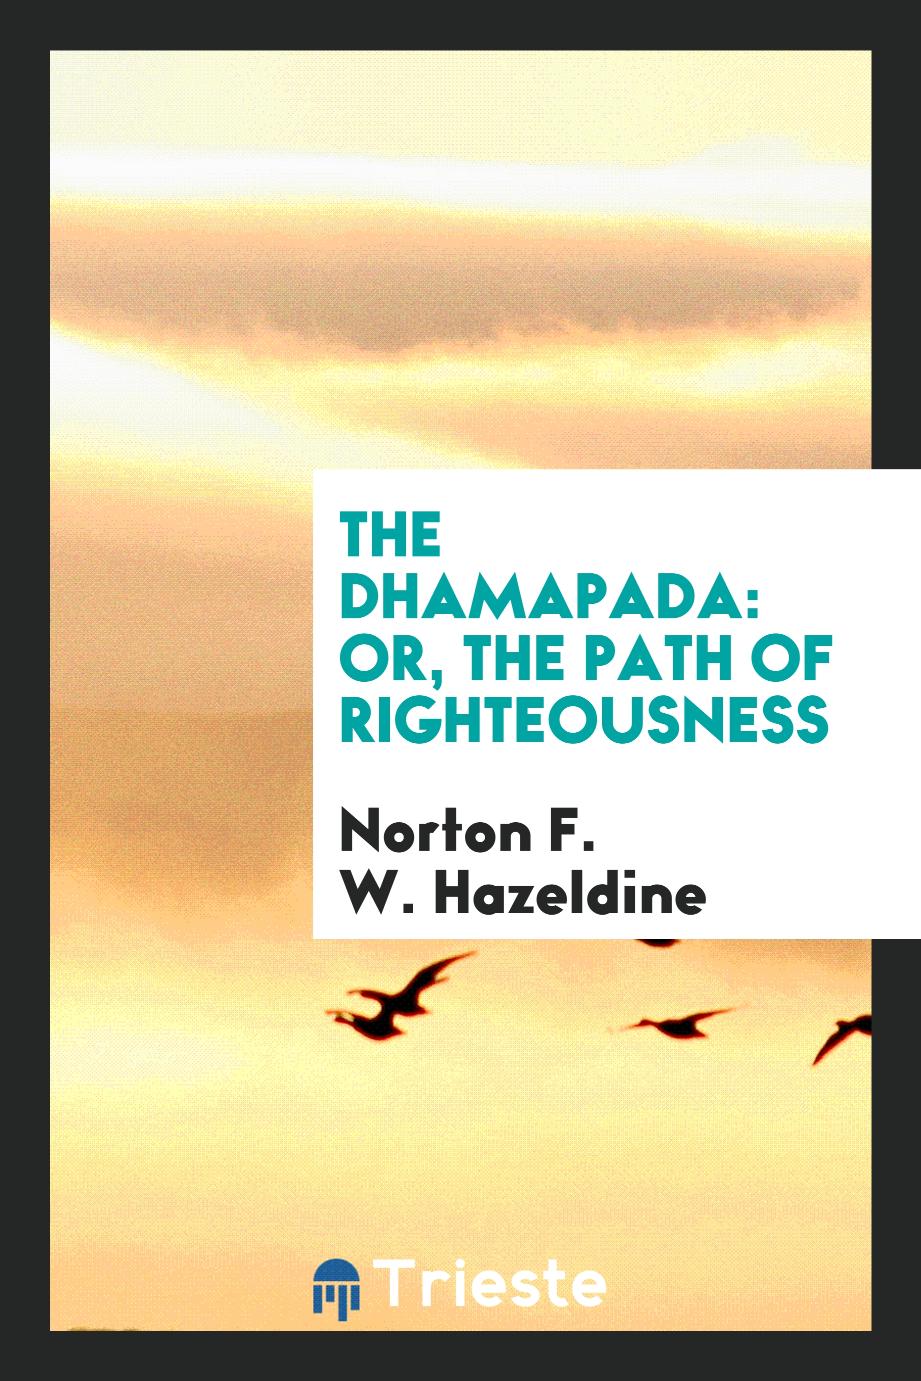 The Dhamapada: Or, The Path of Righteousness